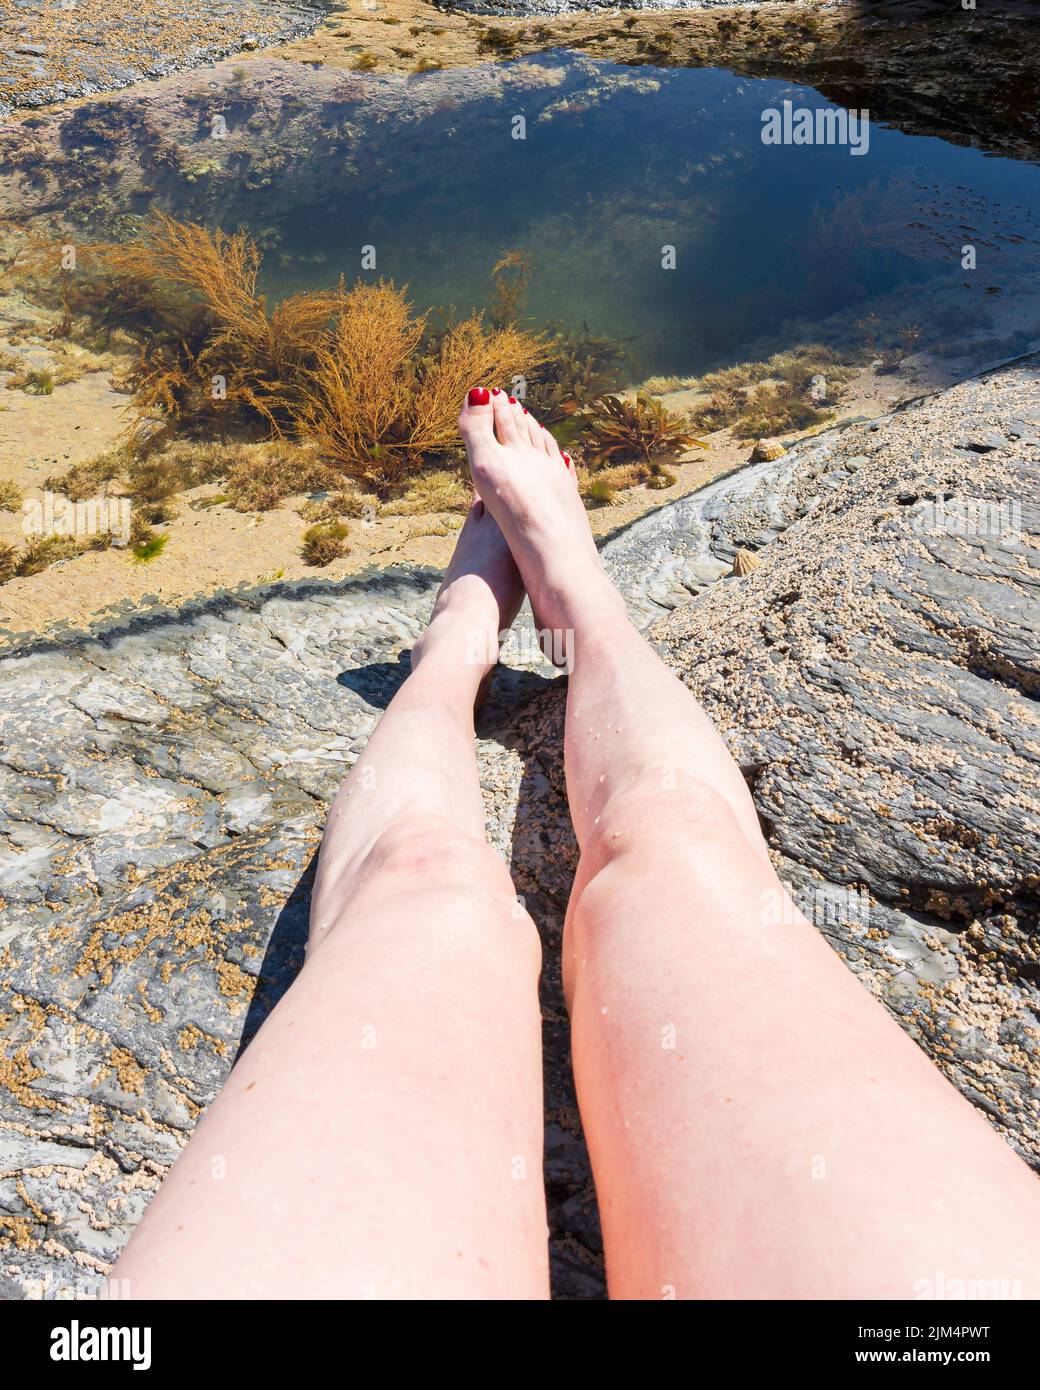 Transgender woman getting her legs tanned on scenic Cornwall beach.Legs only. Stock Photo